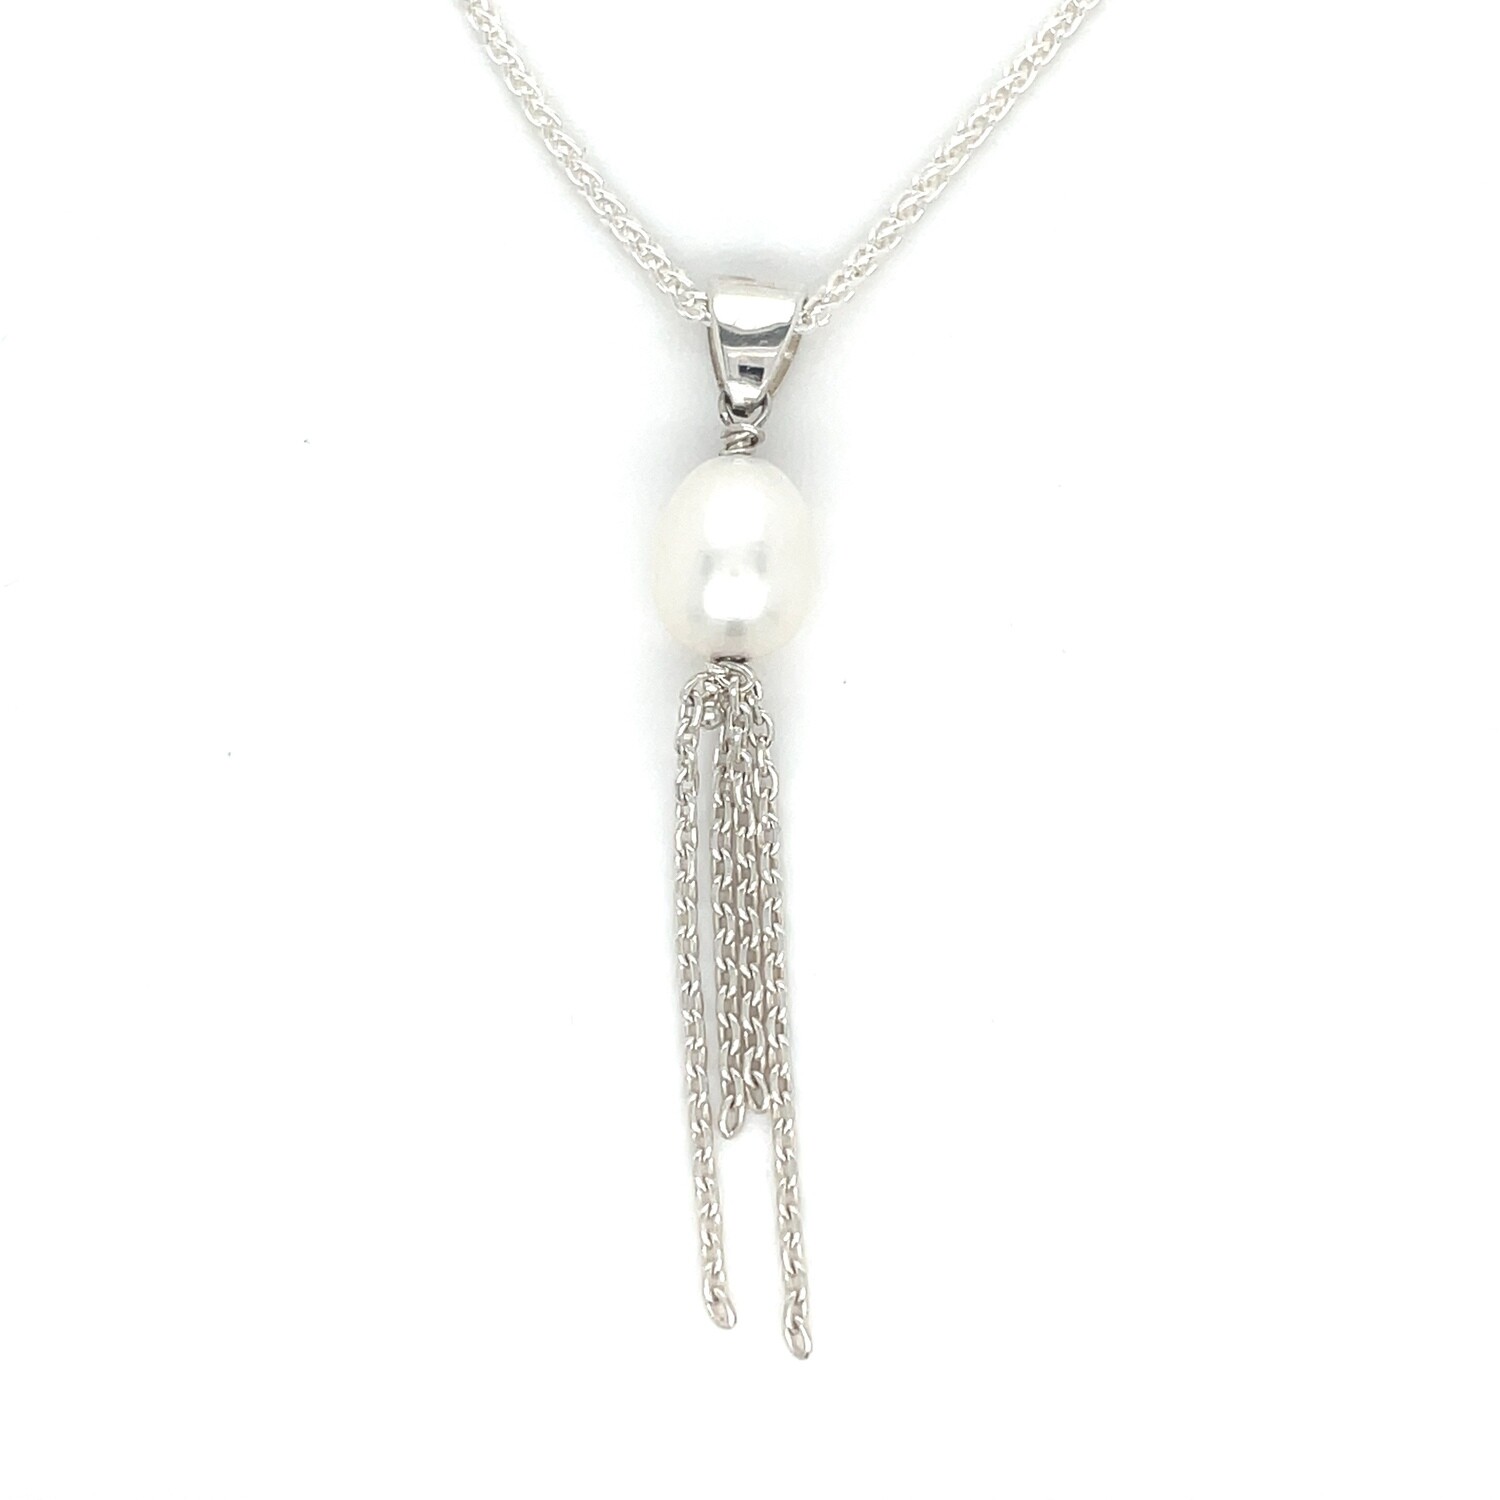 Paolo Pearl Necklace with Silver Chain Tassels